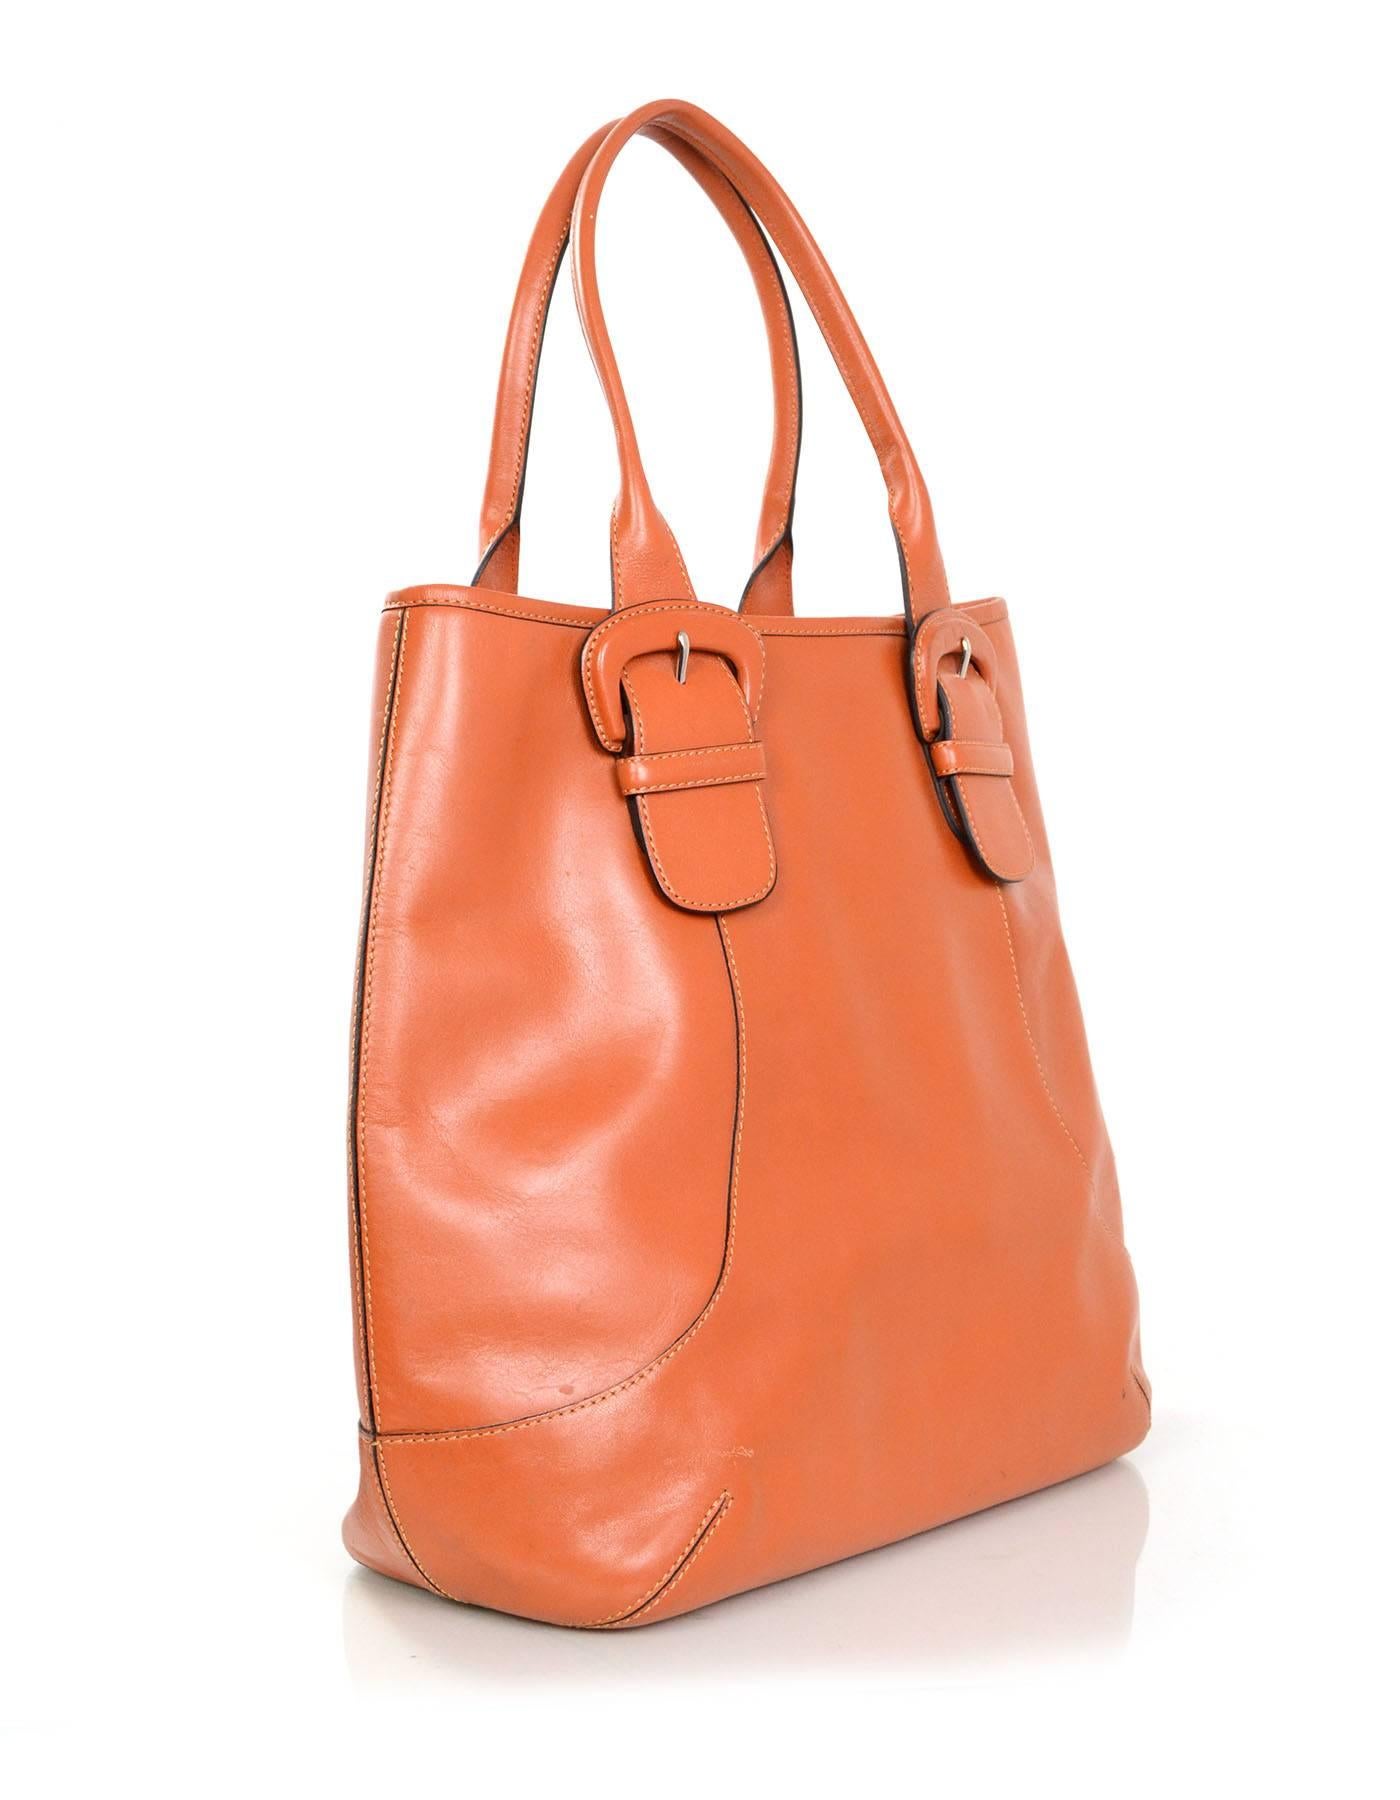 Cole Haan Orange Leather Tote 
Features oversized leather buckles at at straps

Made In: China
Color: Burnt orange
Hardware: Silvertone
Materials: Leather
Lining: Blue nylon-blend textile
Closure/Opening: Open top
Exterior Pockets: